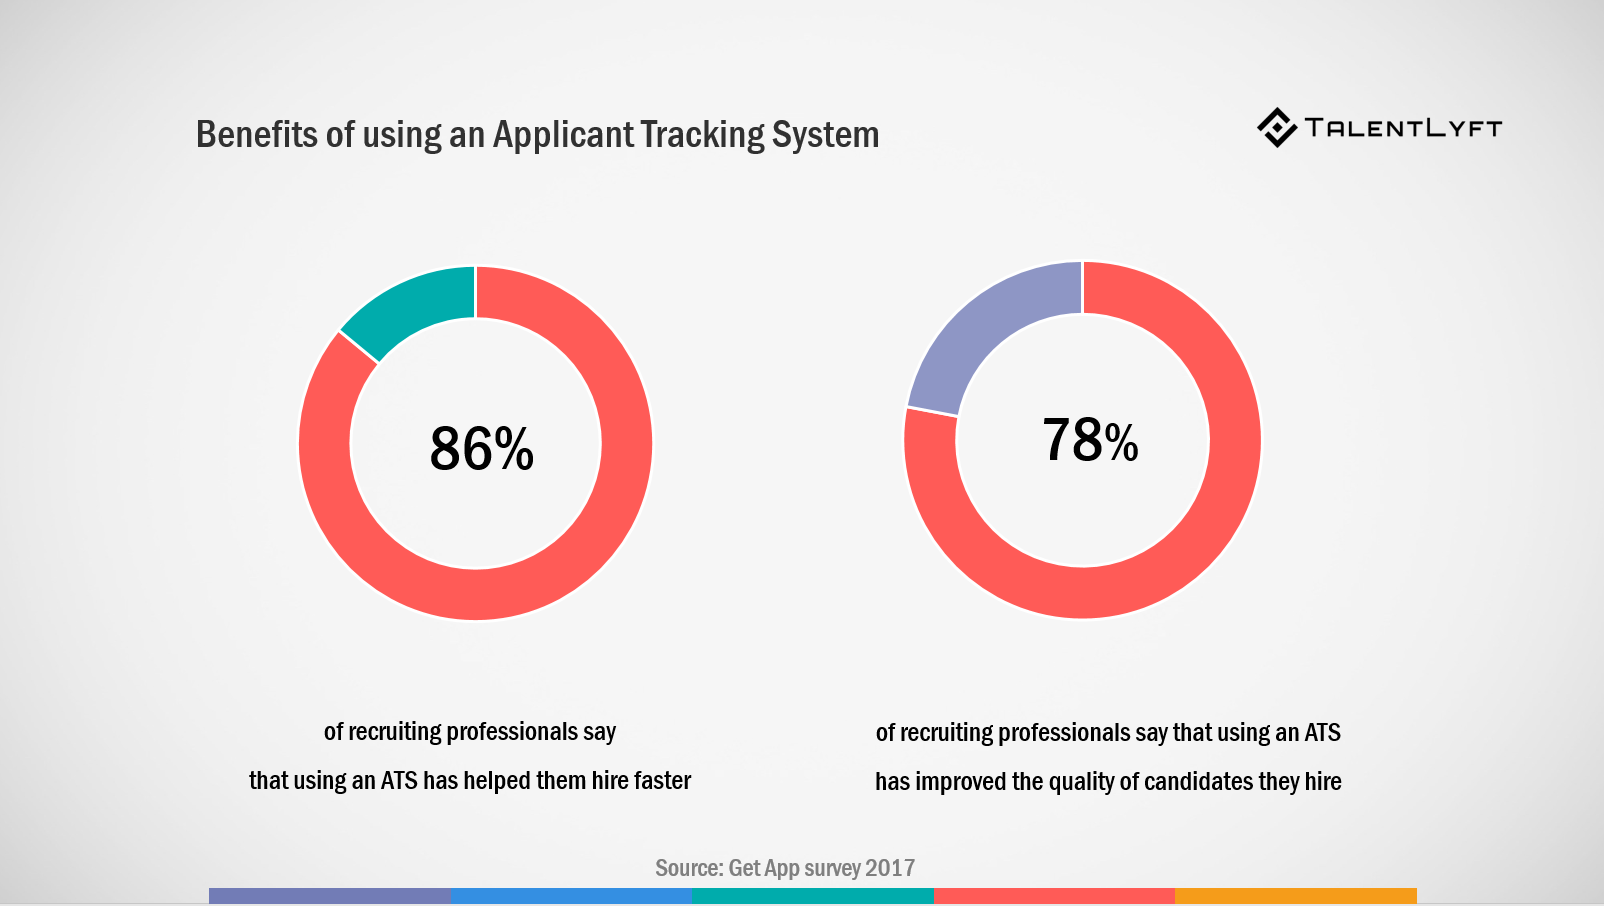 GUIDE-How-to-Find-Your-Perfect-Applicant-Tracking-System-Benefits-oF-using-an-ATS